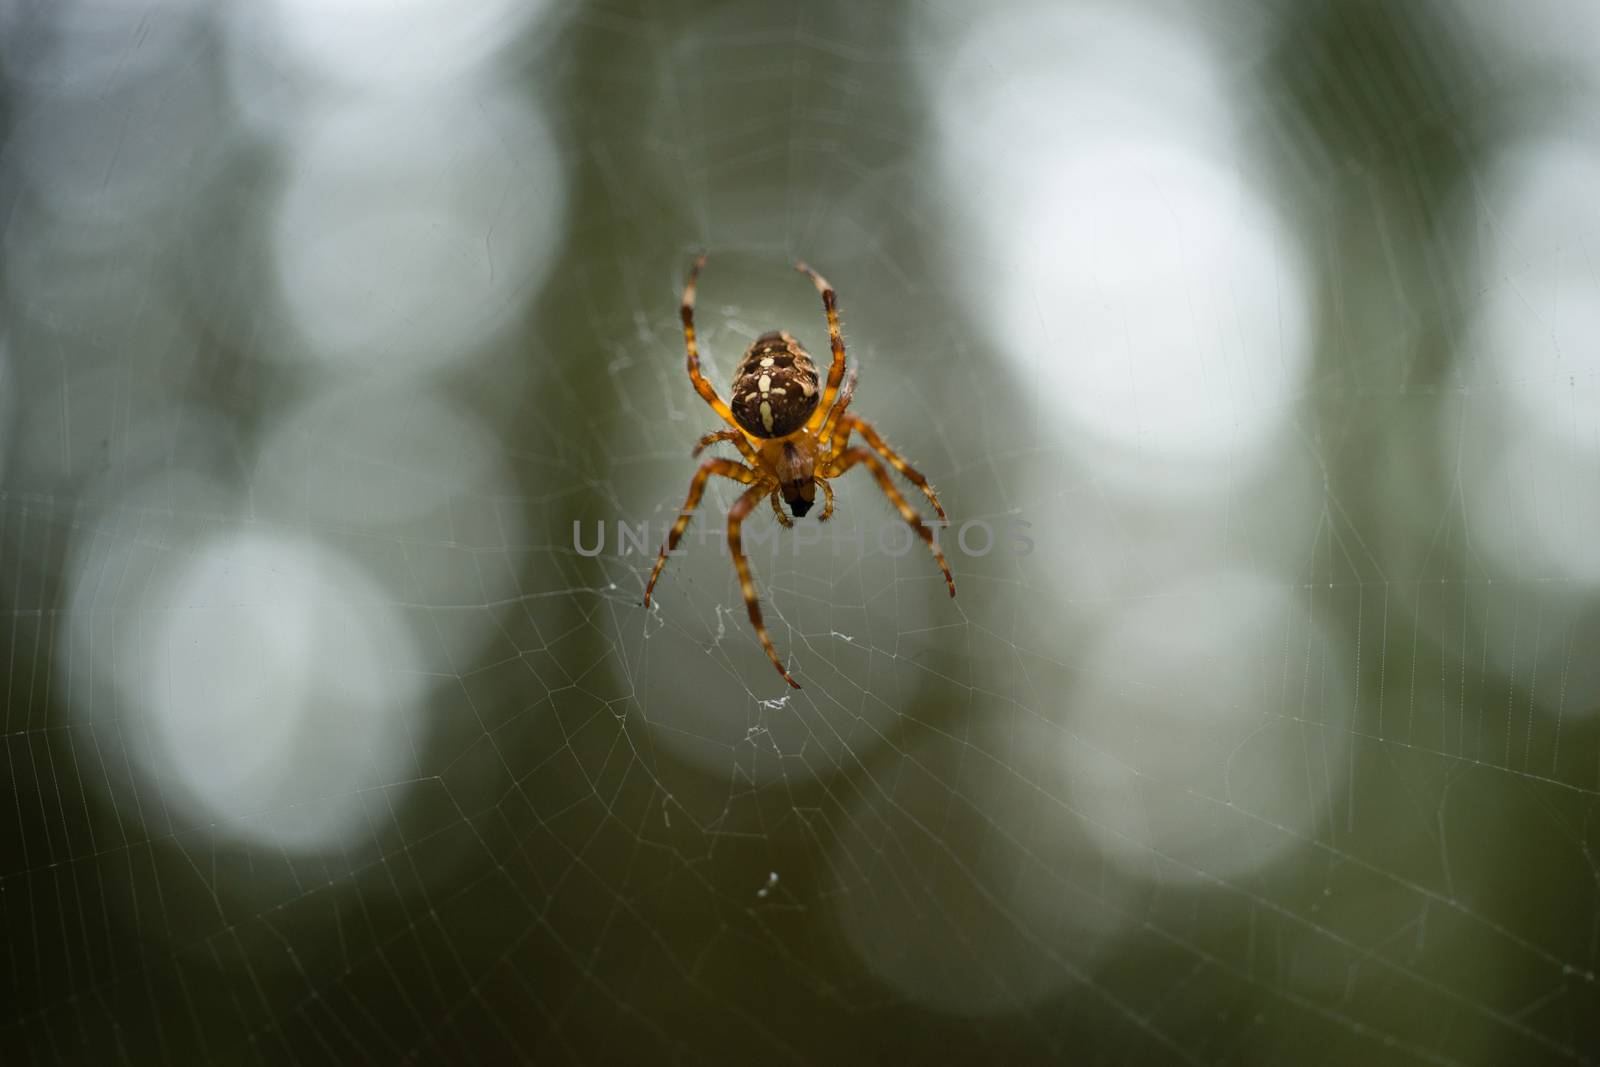 Common Forest Spider Spins Web in the Woods by ChrisBoswell